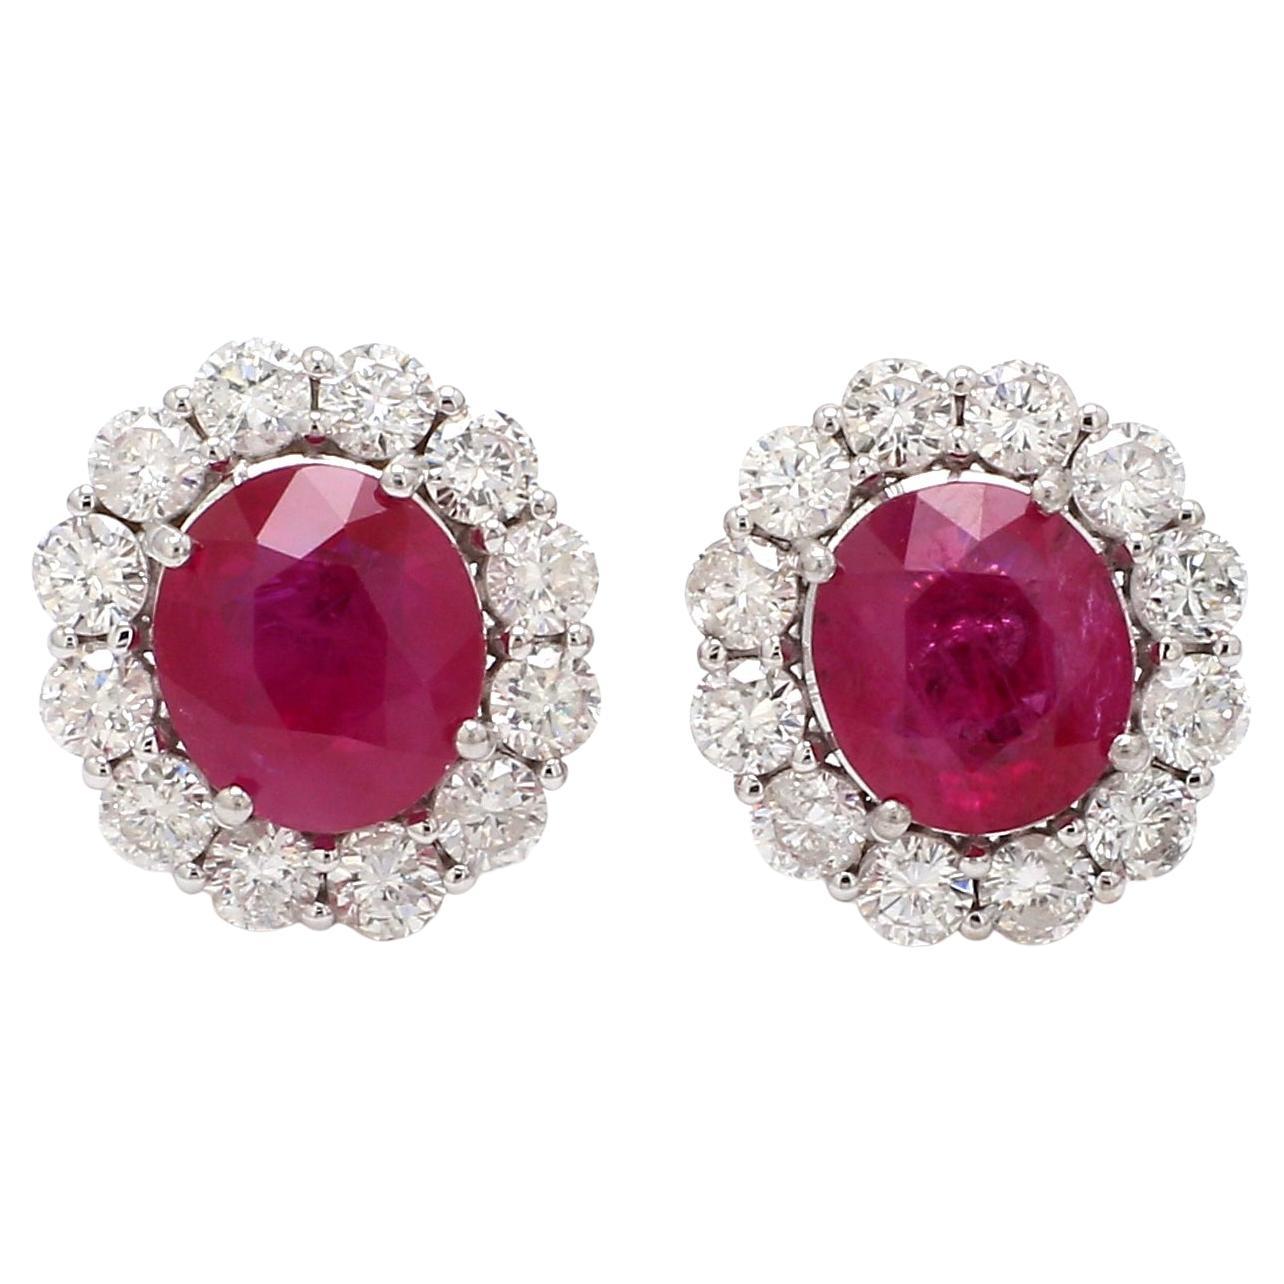 Item Code:- CN-24764 (14k)
Gross Wt :- 5.76 gm
14k Solid White Gold Wt :- 3.33 gm
Natural Diamond Wt :- 2.30 ct.  ( AVERAGE DIAMOND CLARITY SI1-SI2 & COLOR H-I )
Natural Ruby Wt :- 5.70 ct.
Earrings Size :- 15.21x14 mm approx

✦